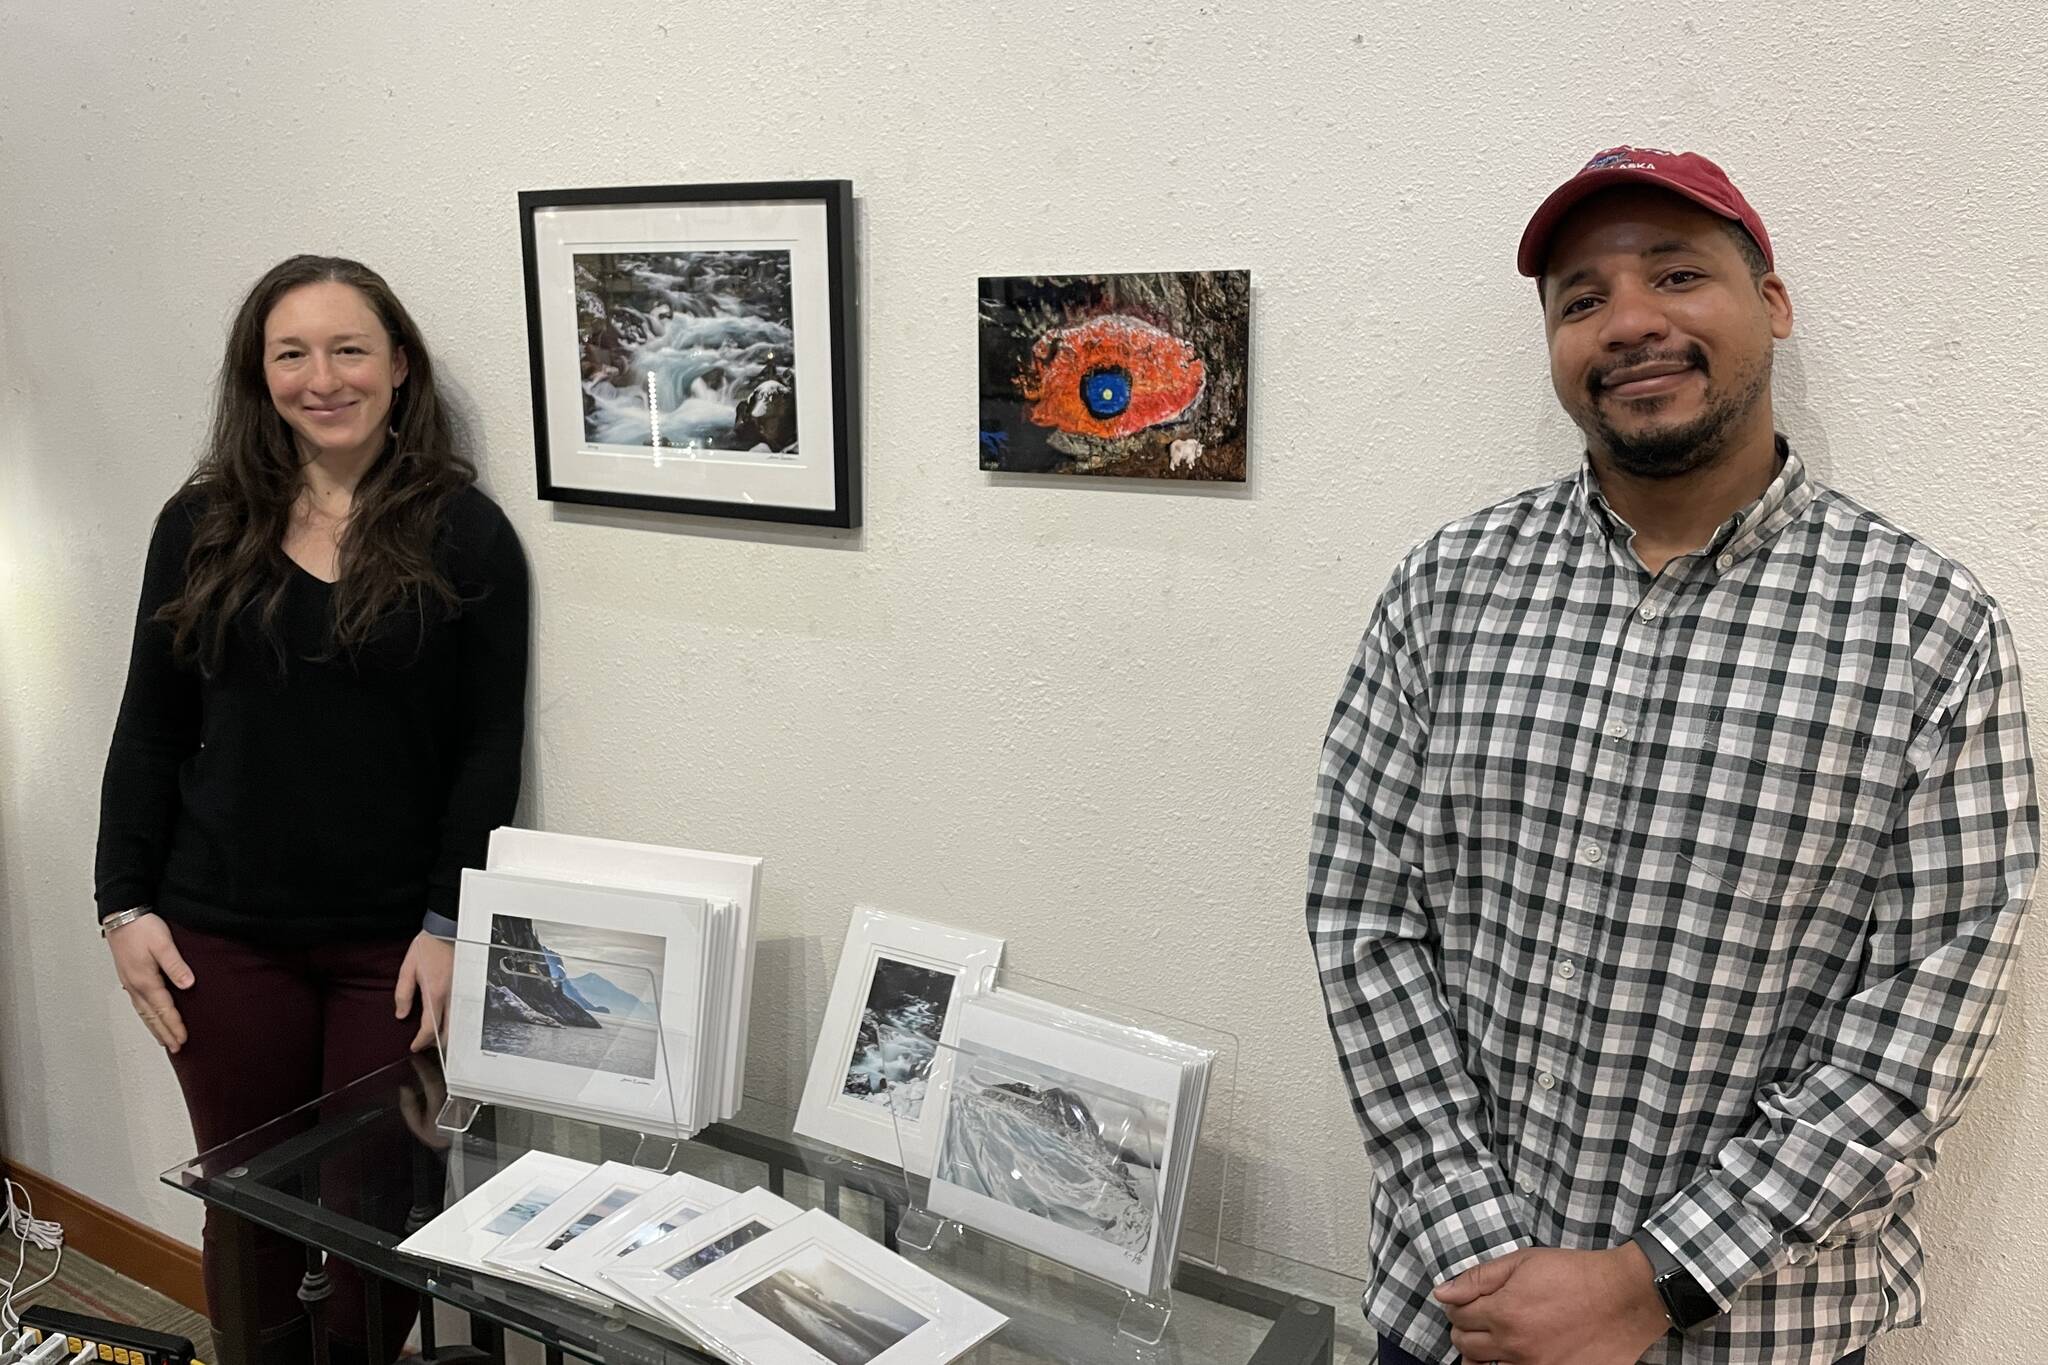 Sarah Davidson and Kevin Jeffrey, Annie Kaill’s featured artists for the March 2022 First Friday, stand by a display of their work at the store on March 2, 2022. (Michael S. Lockett / Juneau Empire)